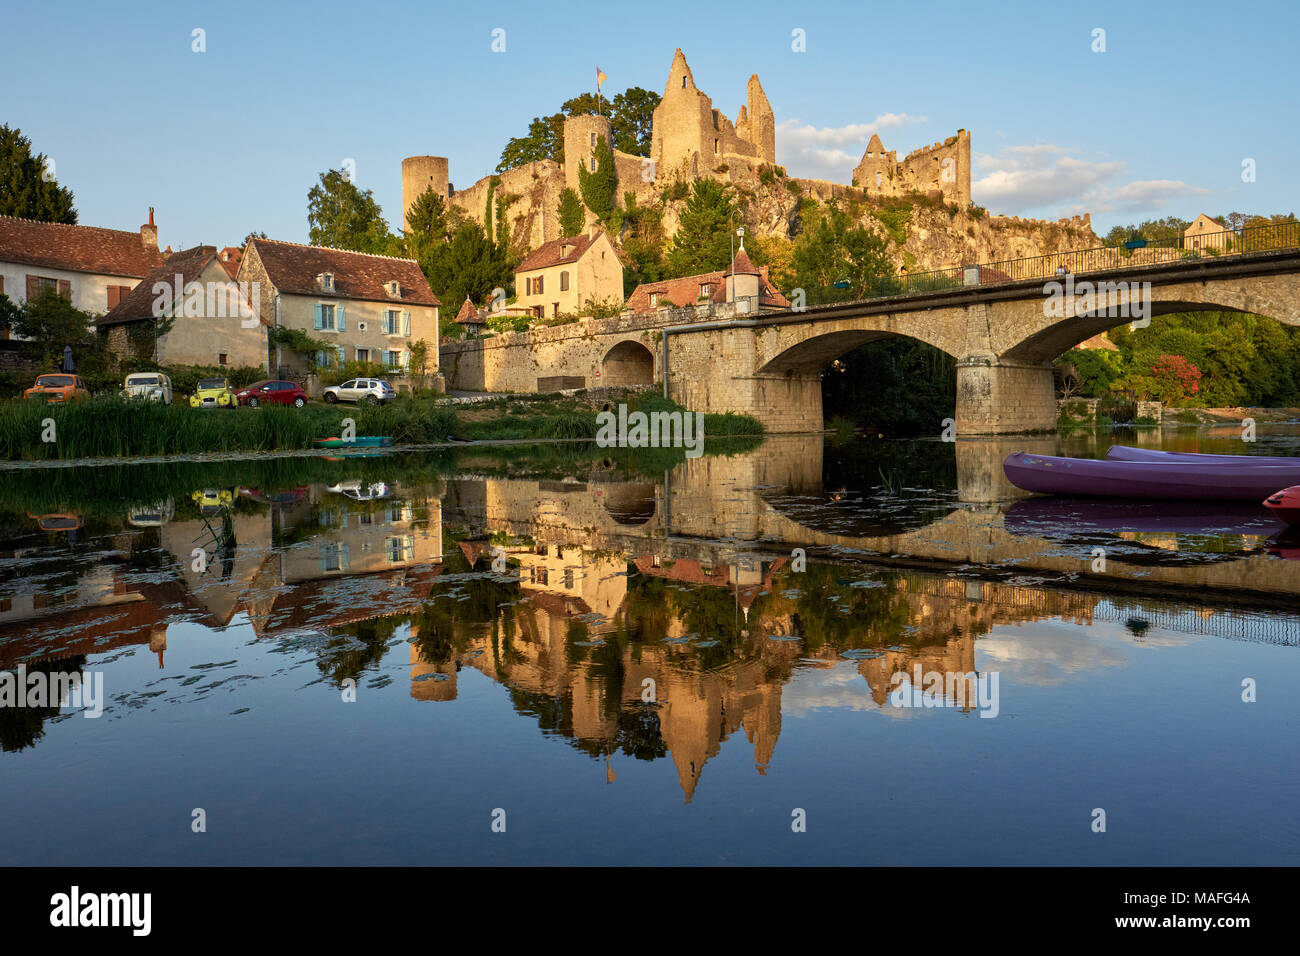 Angles-sur-l'Anglin is a commune in the Vienne department in the Nouvelle-Aquitaine region in western France. Stock Photo